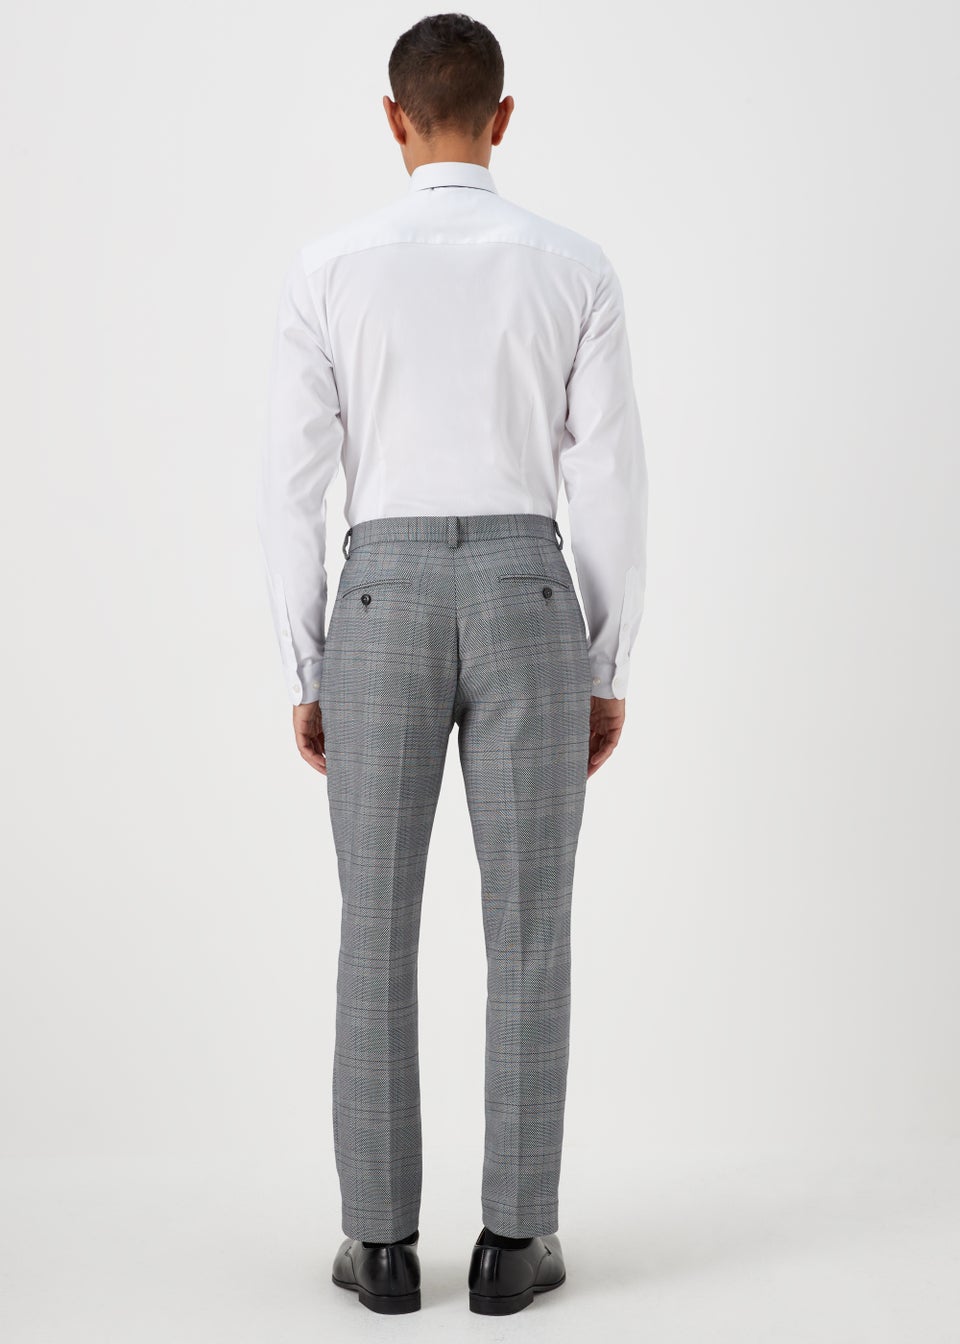 Taylor & Wright Forth Grey Check Skinny Fit Suit Trousers